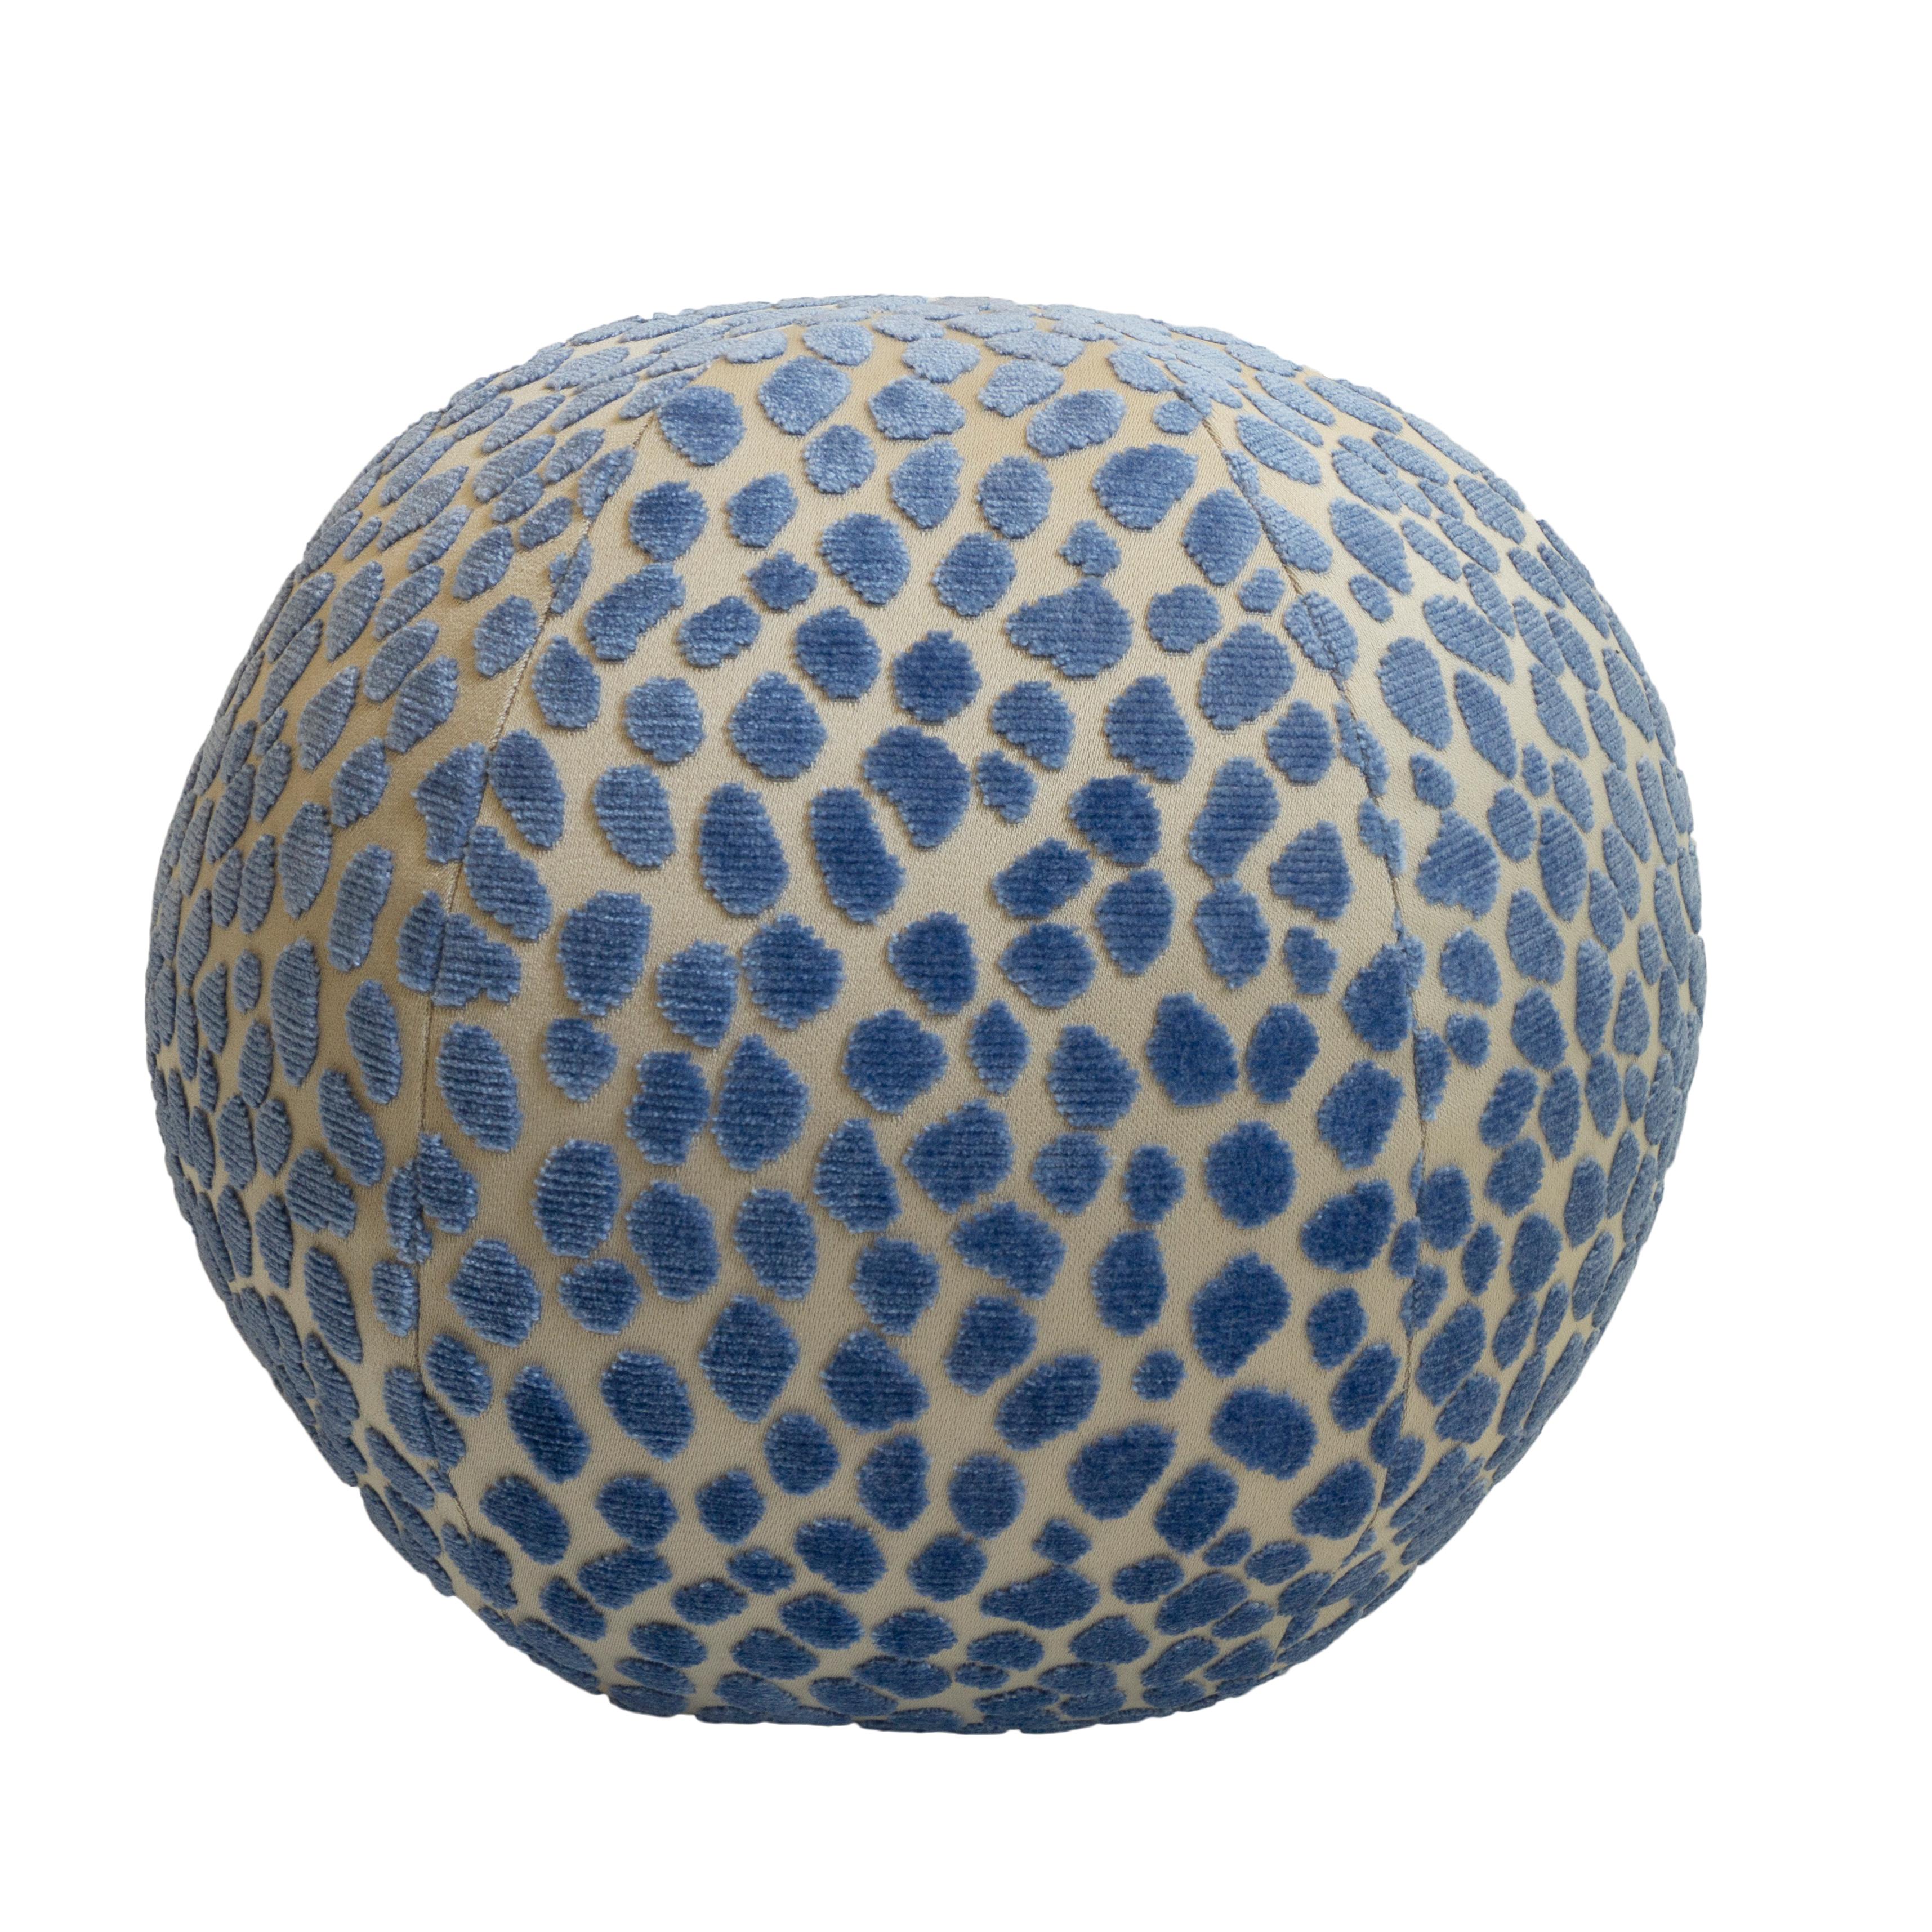 Our Samoa velvet ball pillow is made with an Osborne and Little fabric which features an all-over pattern of jacquard velvet dots in vibrant light blue. All pillows are hand sewn at our studio in Norwalk, CT. 

Measurements:

12” H x 12’ W.

  